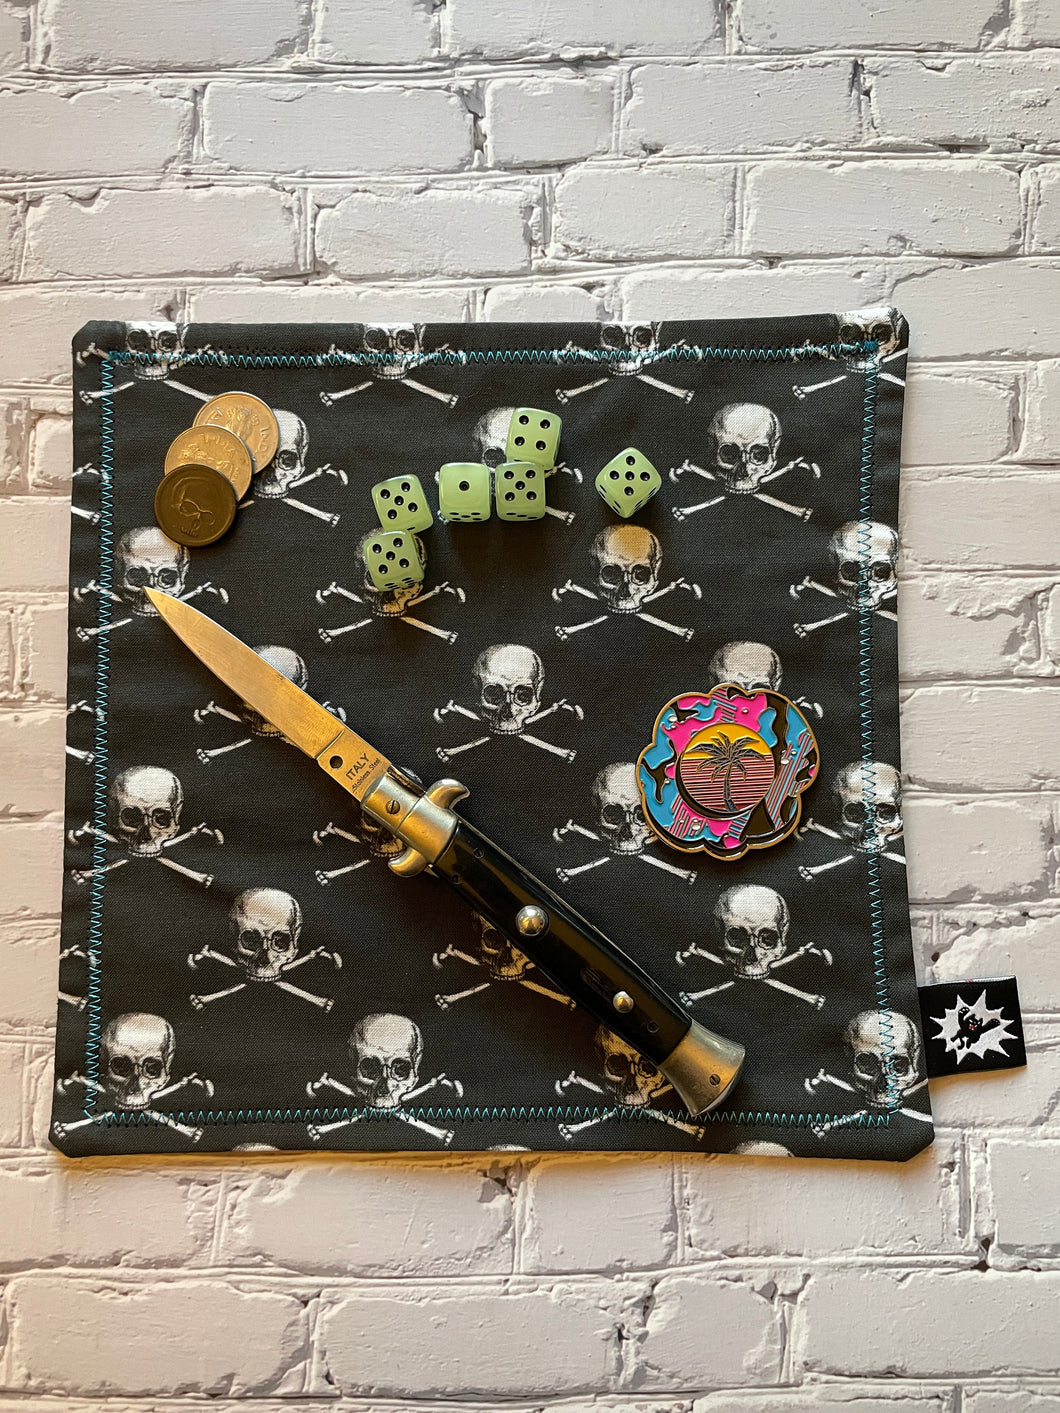 EDC Hank | Handkerchief for Every Day Carry | EDC Gear | Hank For EDC Organizer Pouch | Jolly Roger  | Paracord | Scull and Crossbones